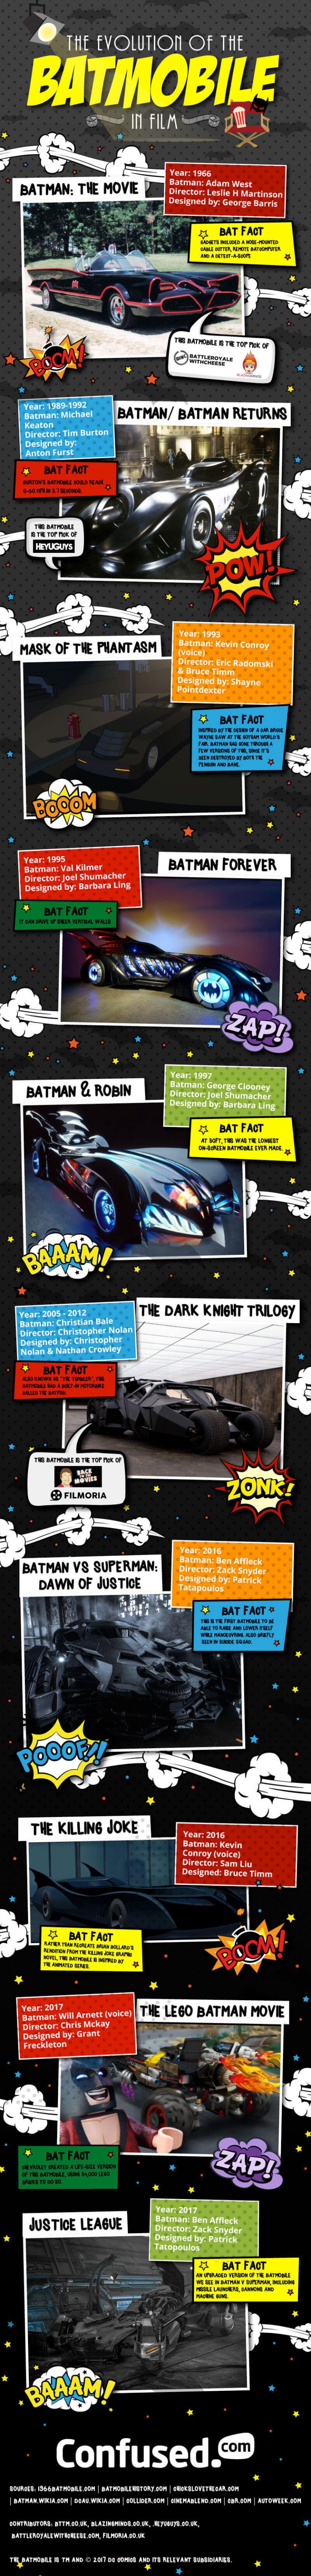 Infographic on The Evolution of the Batmobile in Film by Confused.com